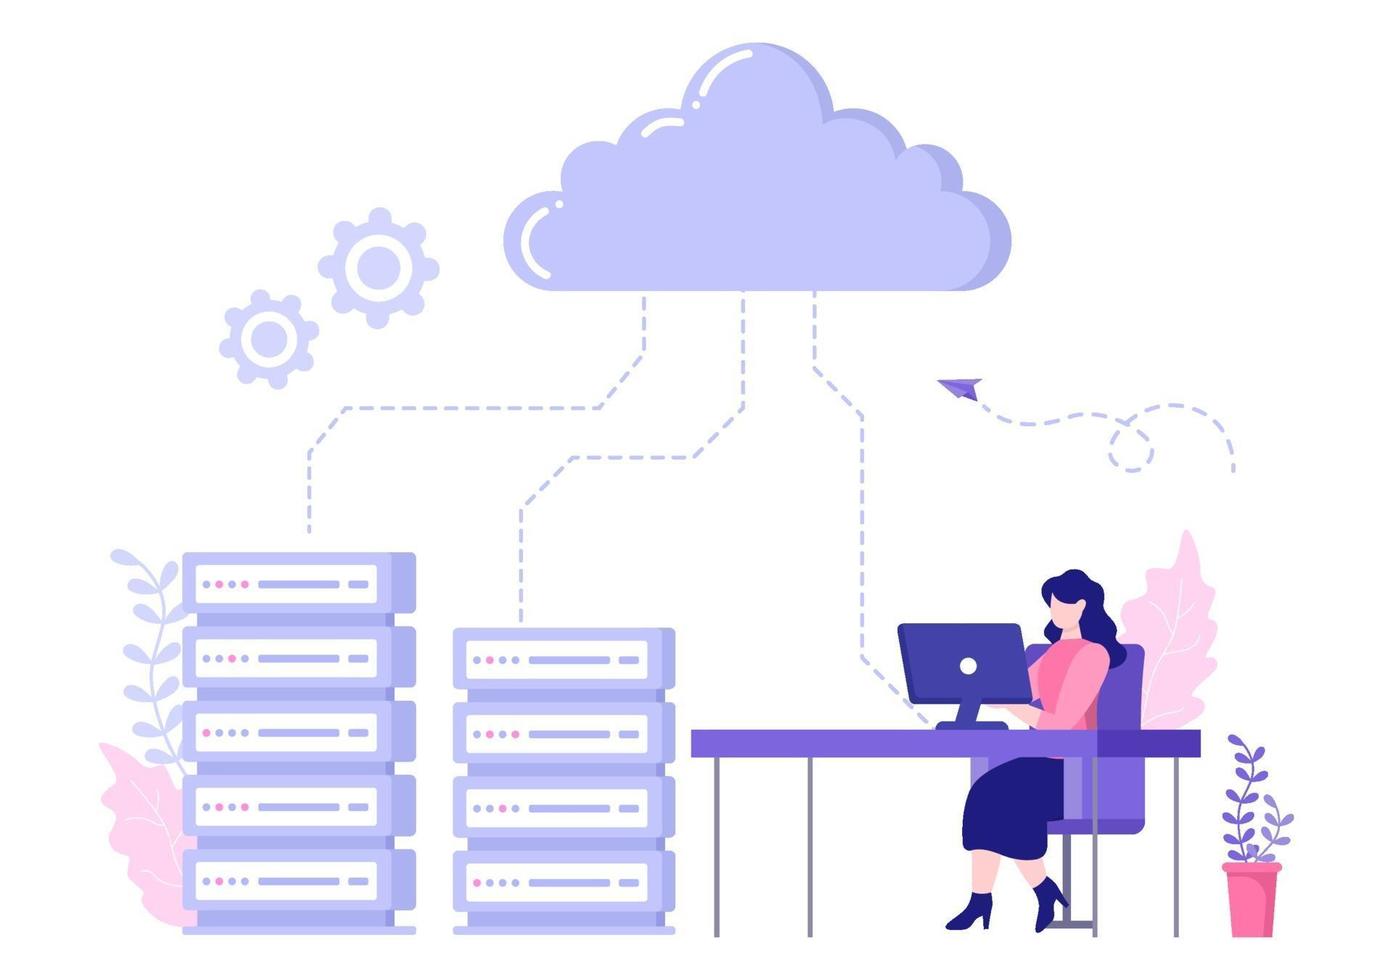 Computer Cloud Server Hosting Storage Illustration Of Data Transmission Technology and Protection With Administrator or Developer Team vector